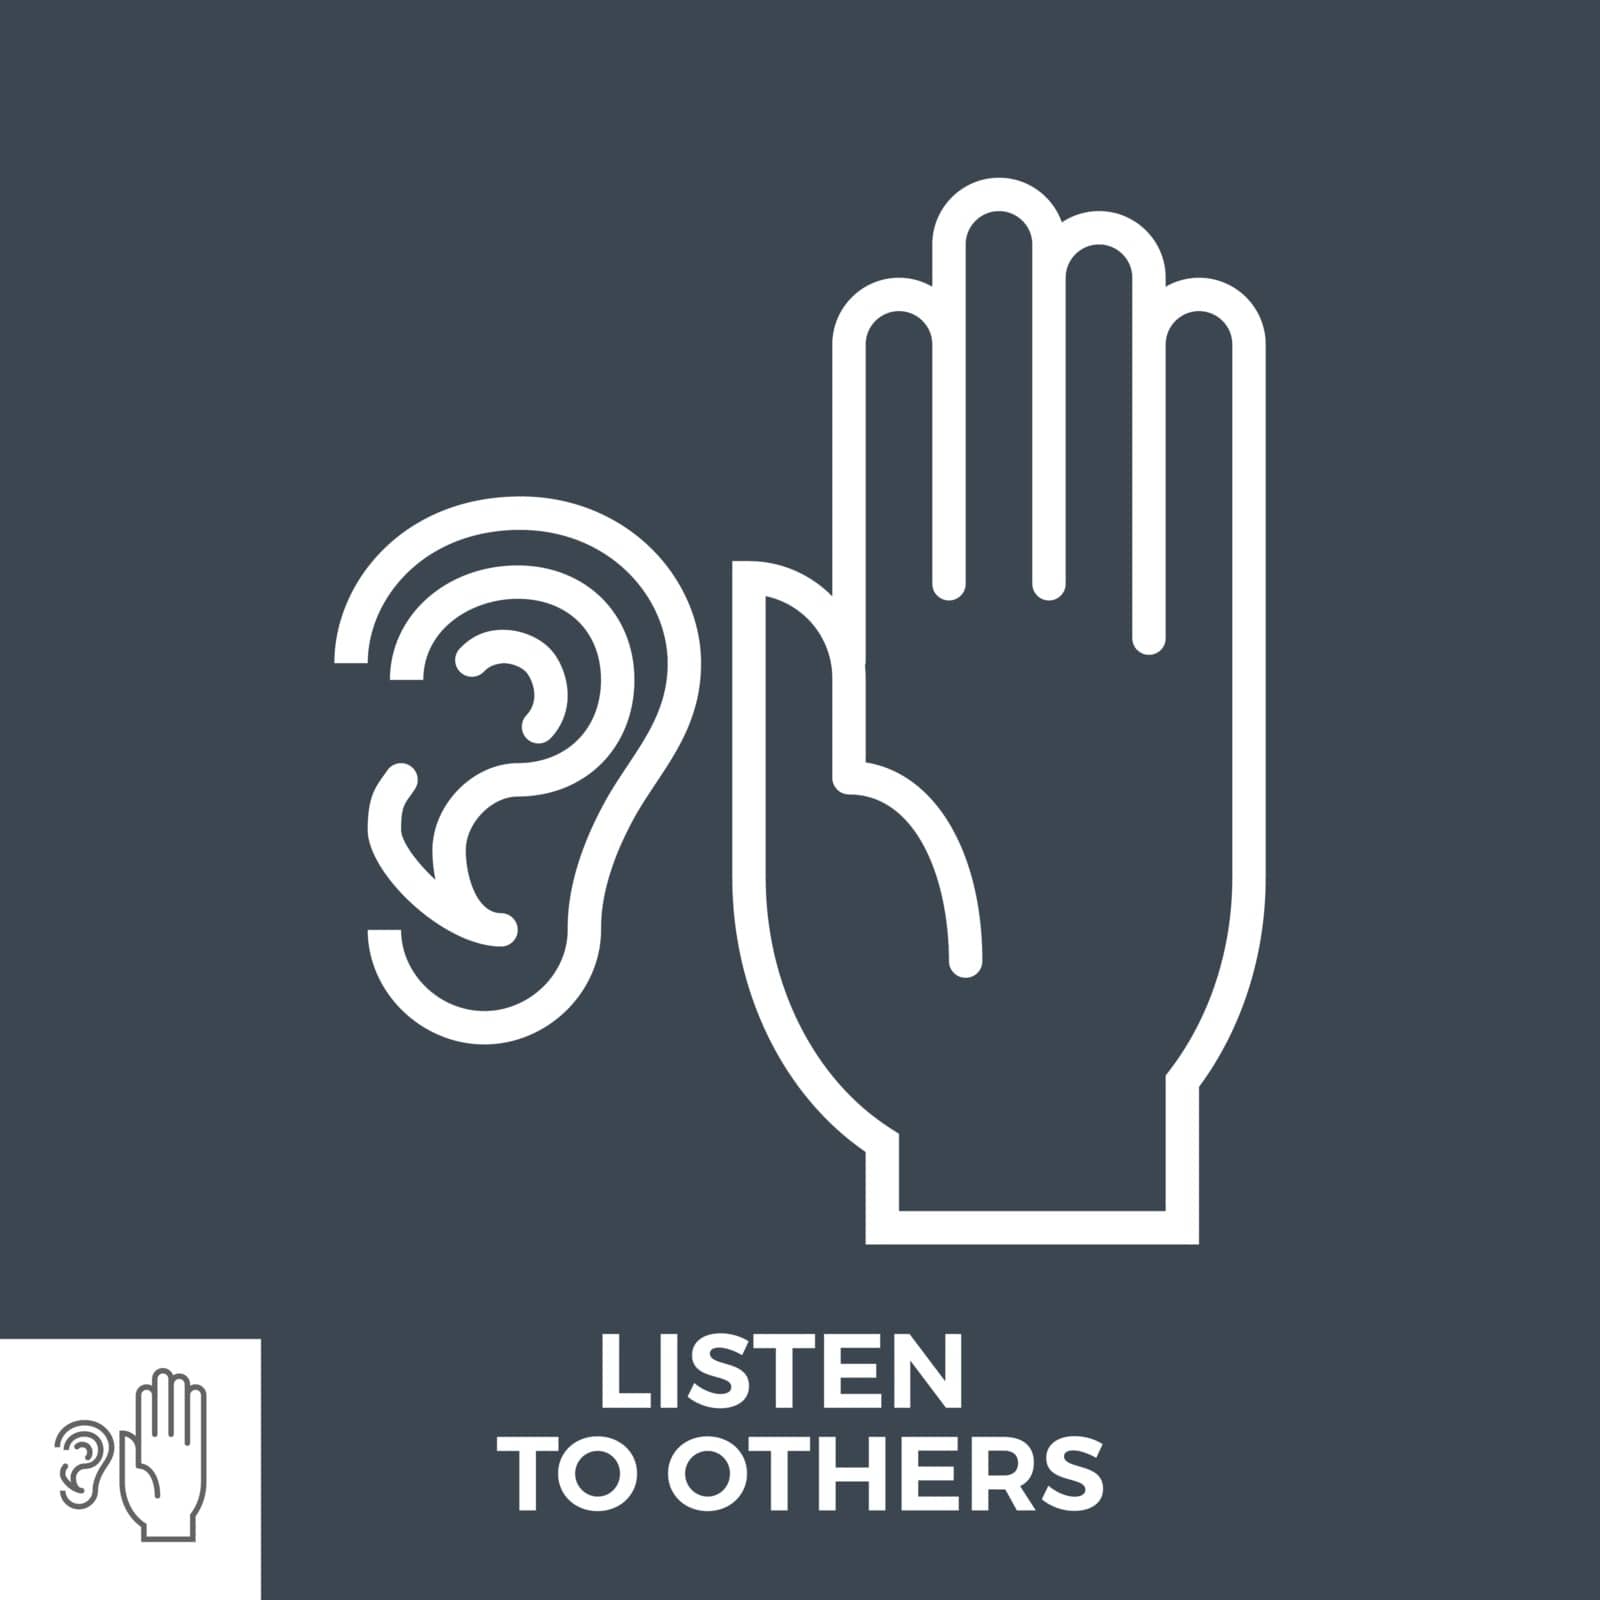 Listen to Others Thin Line Vector Icon Isolated on the Black Background.